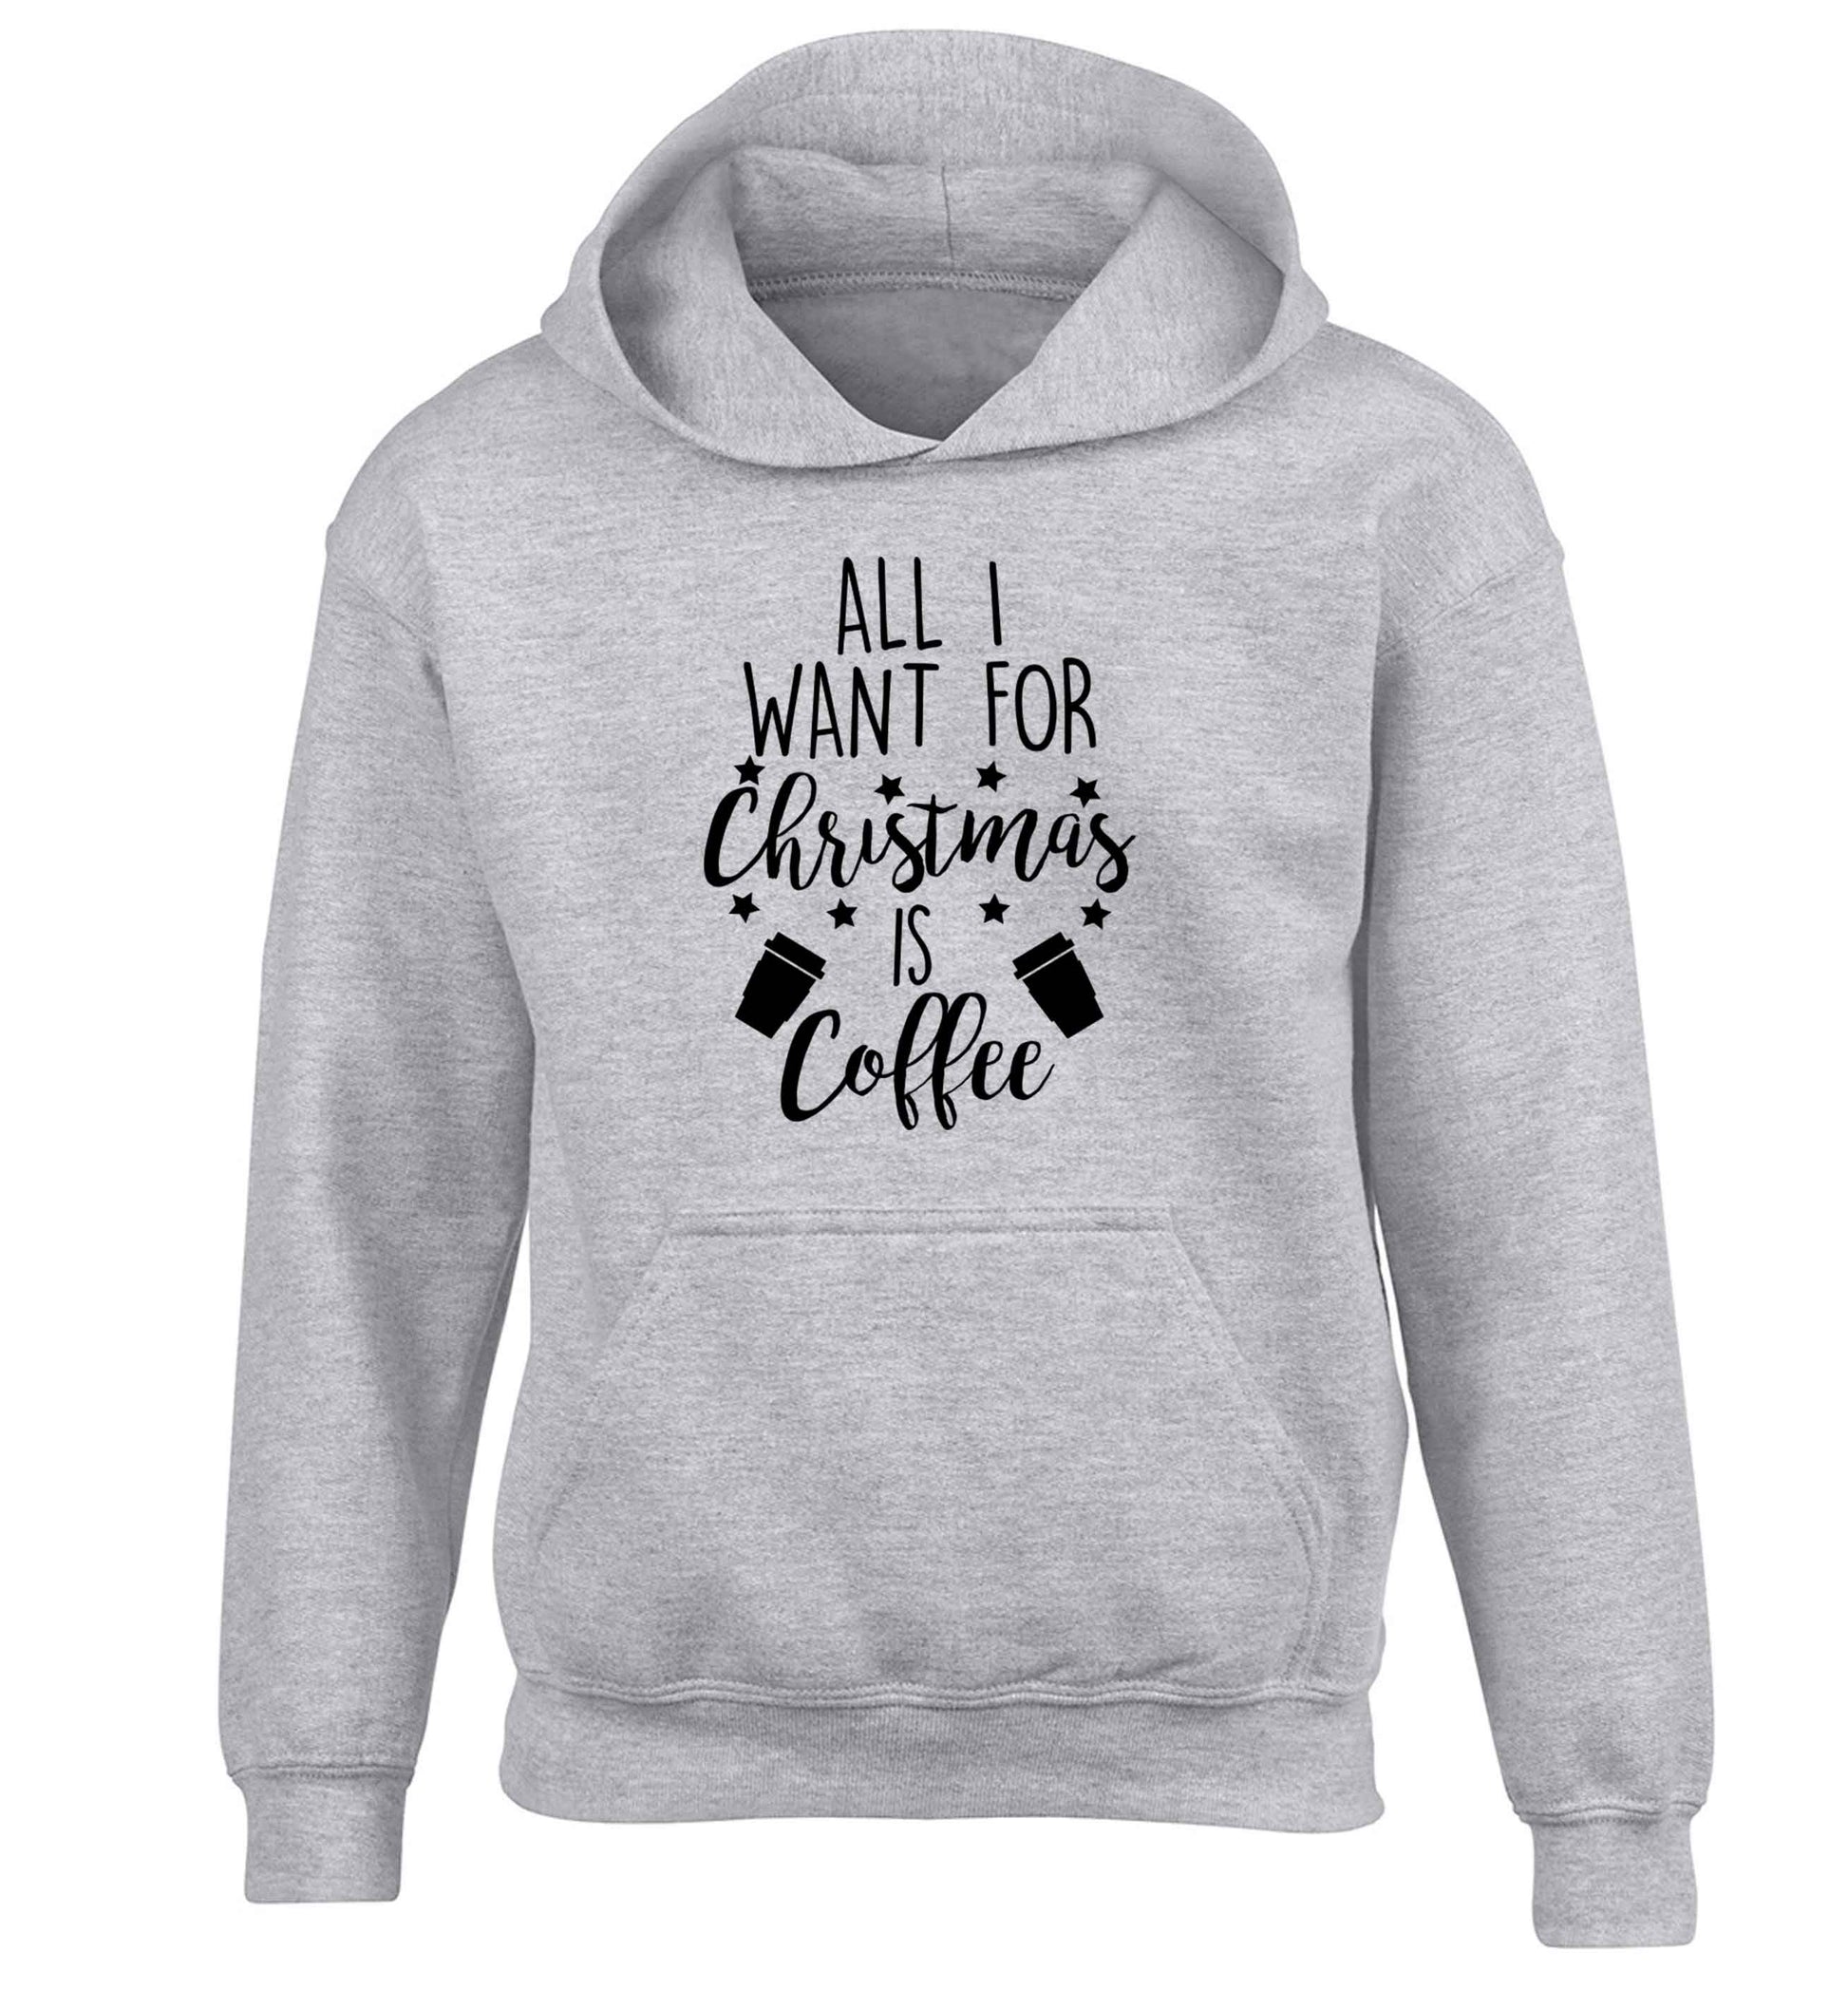 All I want for Christmas is coffee children's grey hoodie 12-13 Years